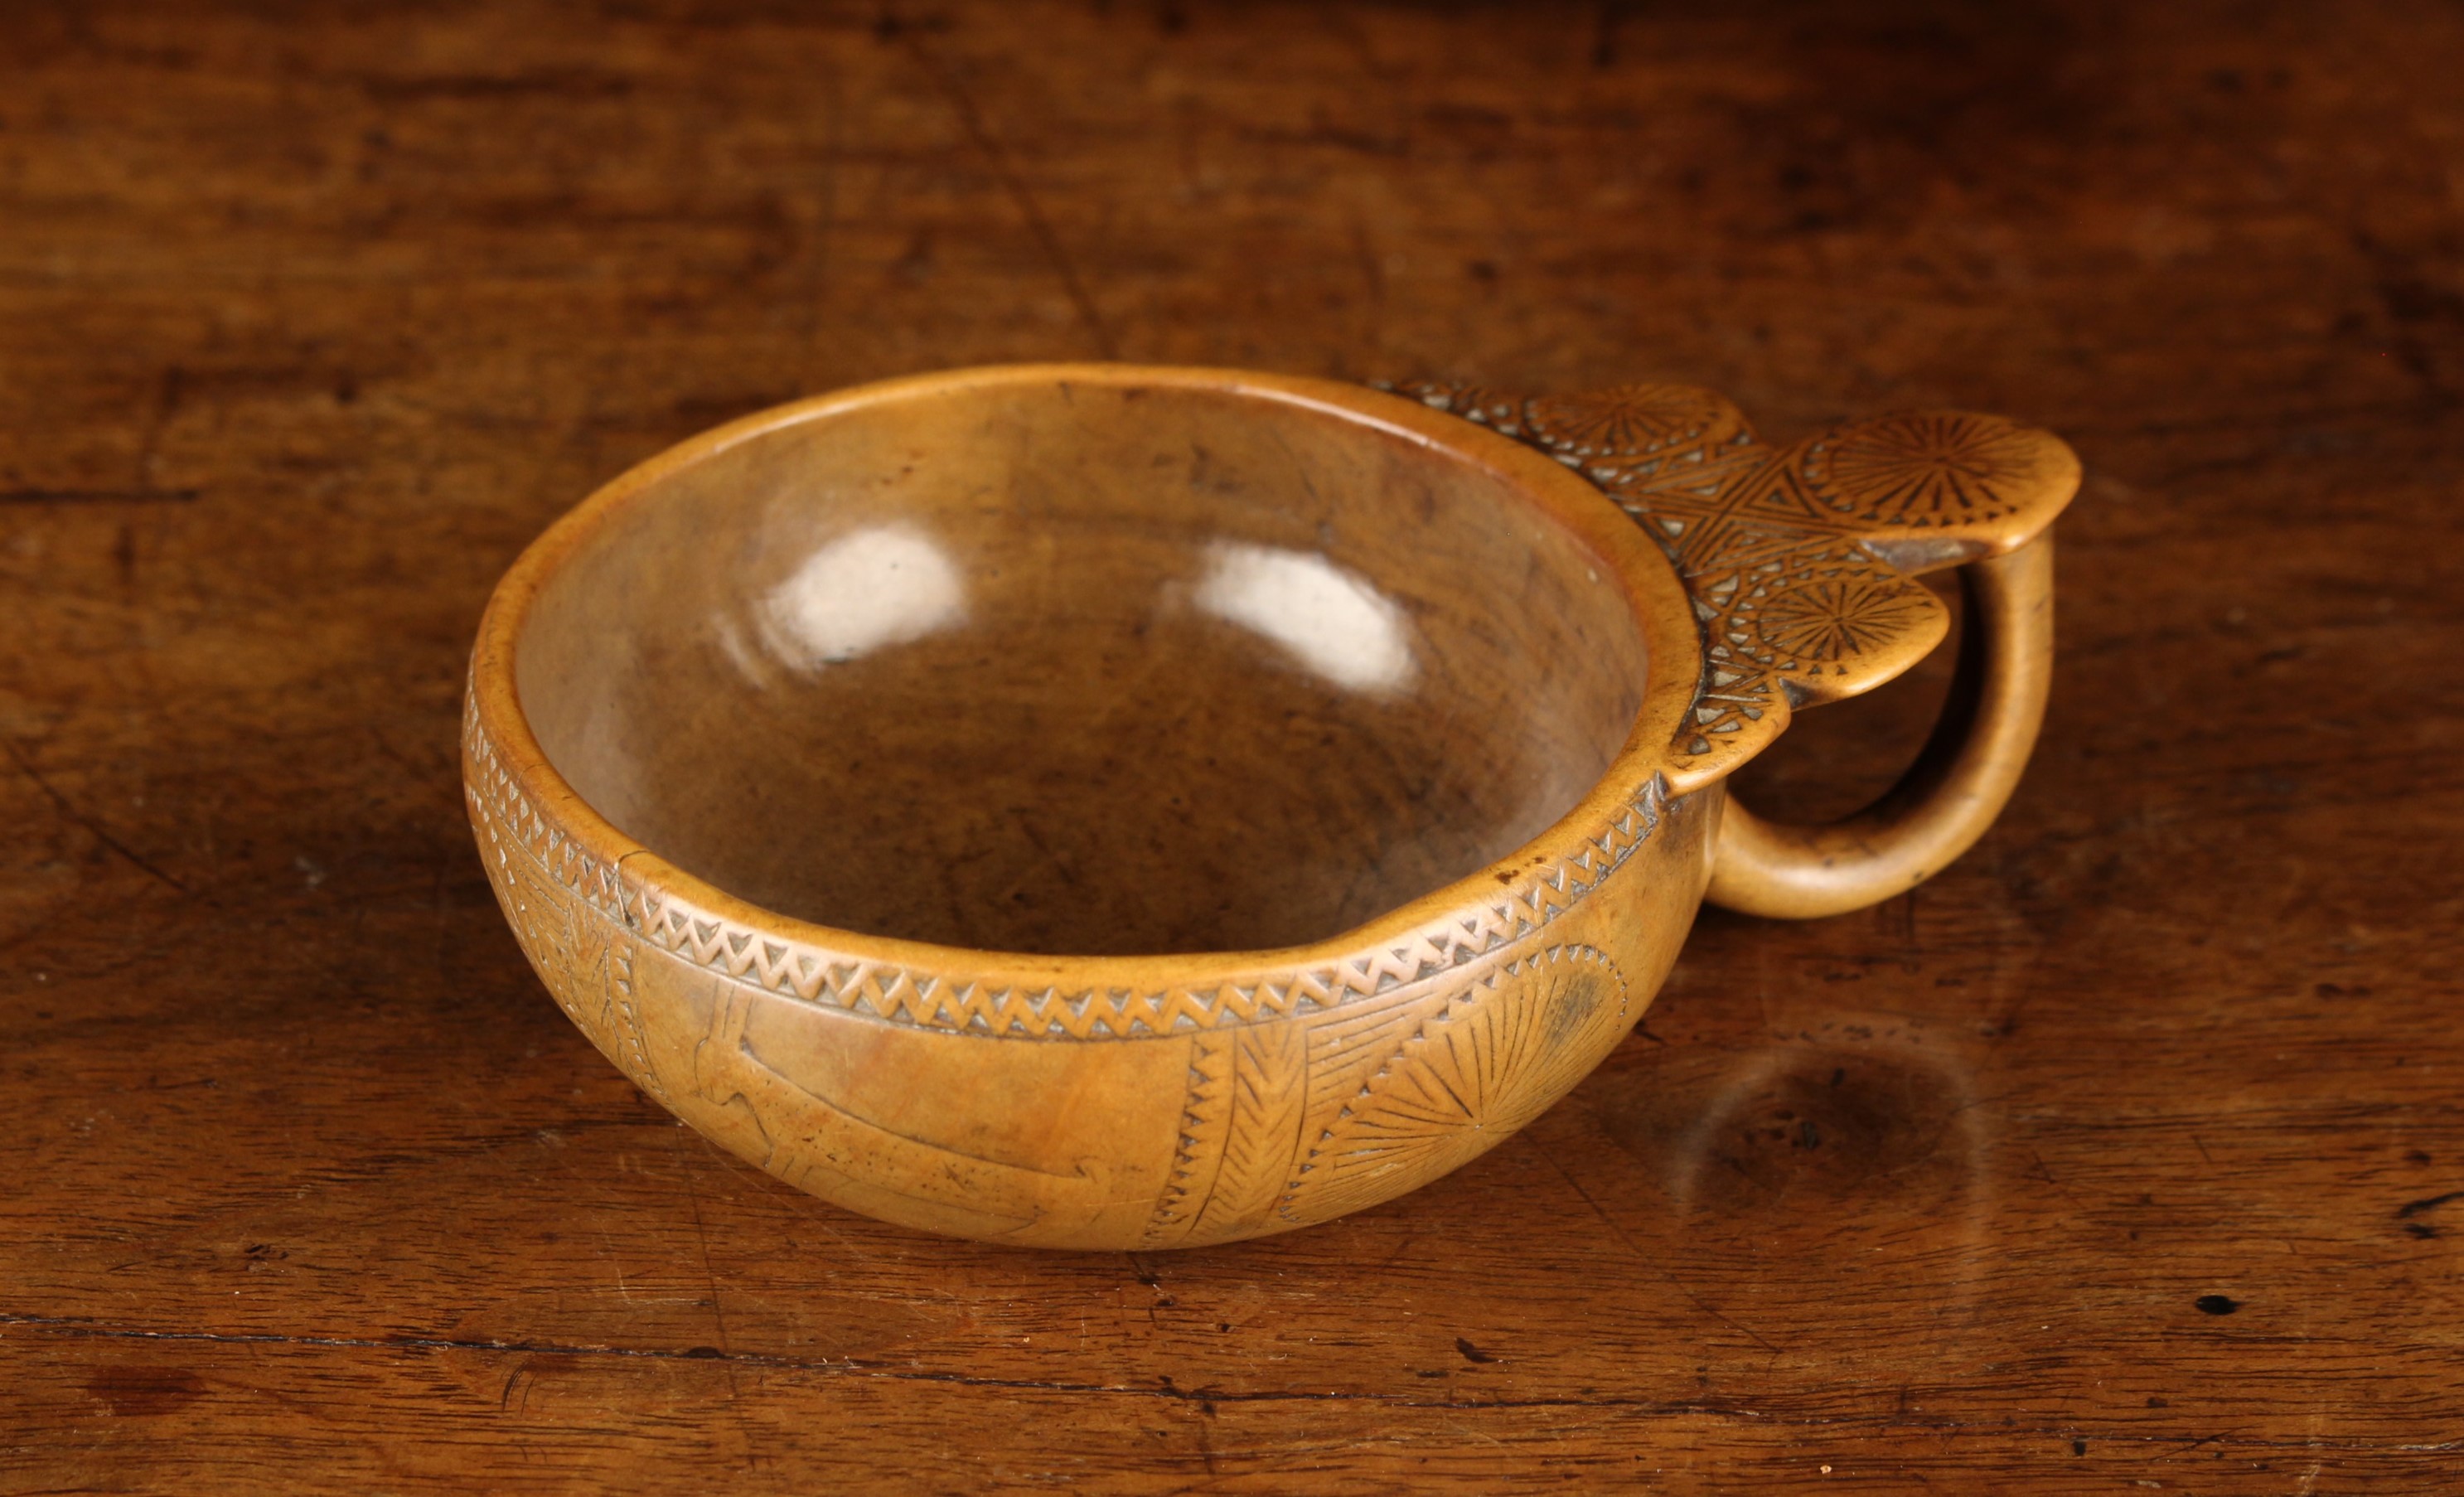 A Fine & Rare 16th/17th Century Boxwood Porringer or Tasting Cup of rich colour and patination. - Image 4 of 10